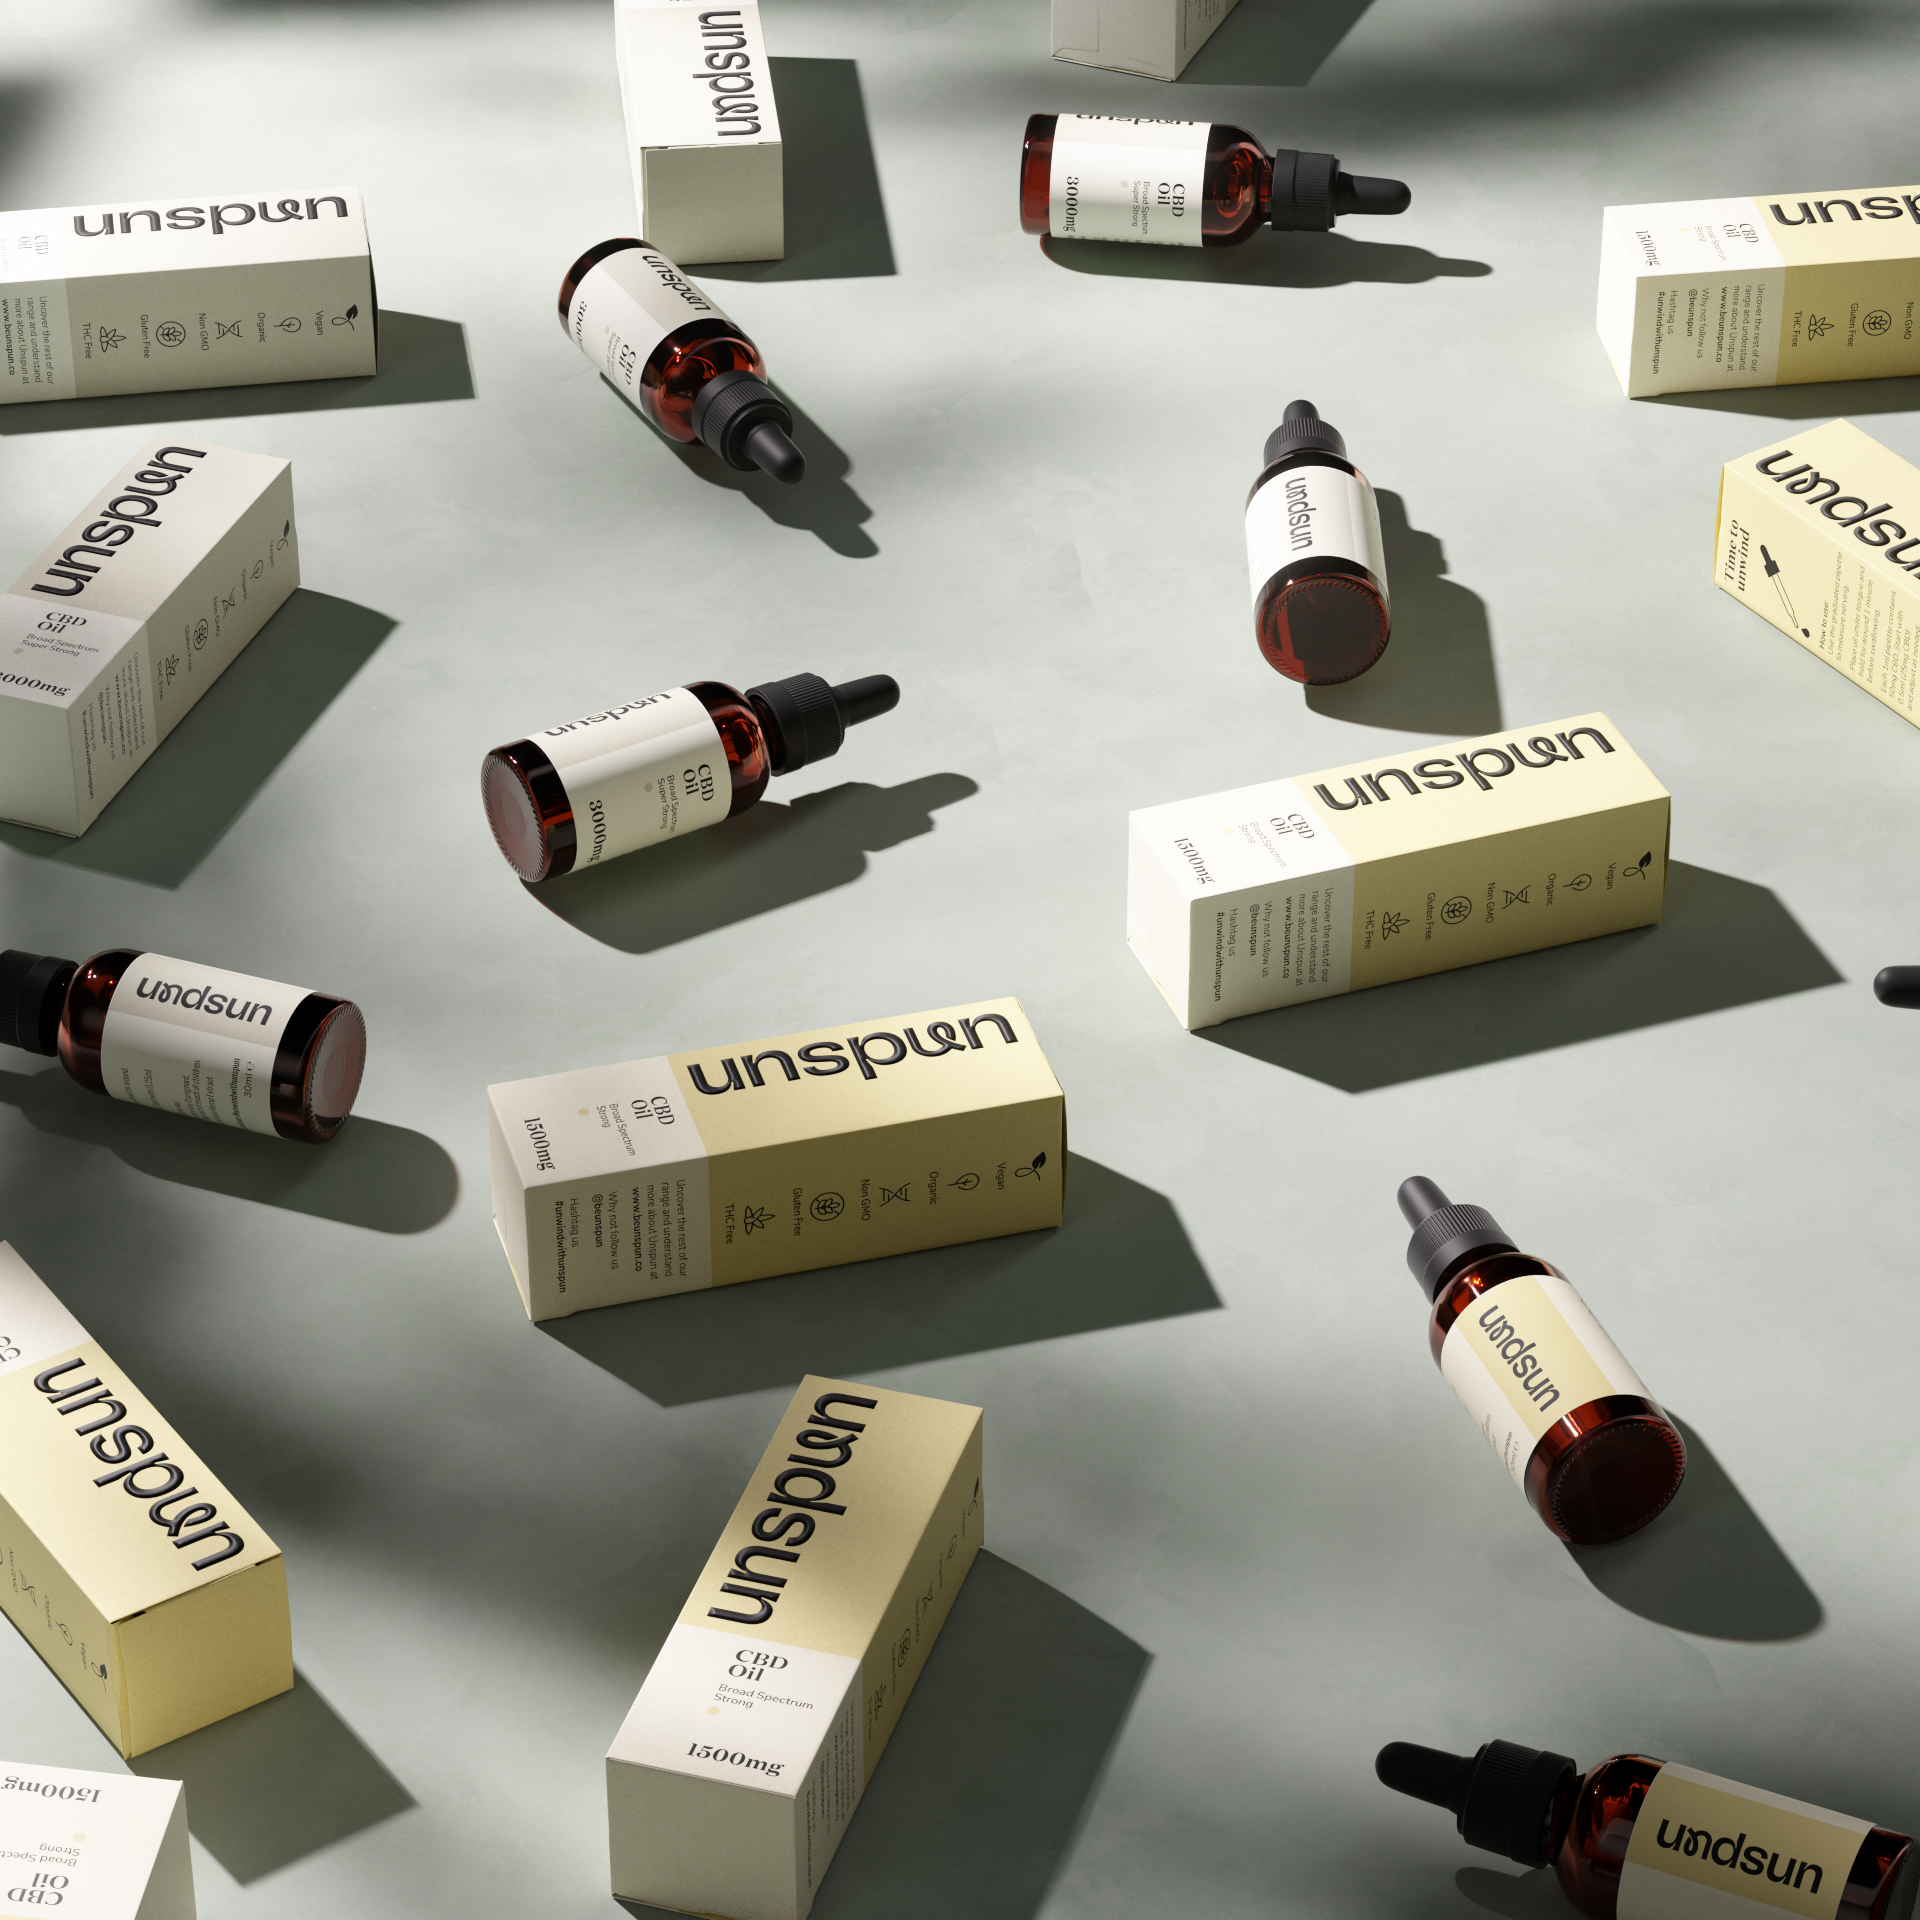 An array of Unspun CBD oil products artfully arranged, casting soft geometric shadows on a neutral surface. Amber glass bottles with black droppers lie next to their white and beige packaging, prominently featuring the Unspun logo. Each box is labeled with '1500mg' and '30ml,' highlighting the quantity and concentration of the CBD oil inside.